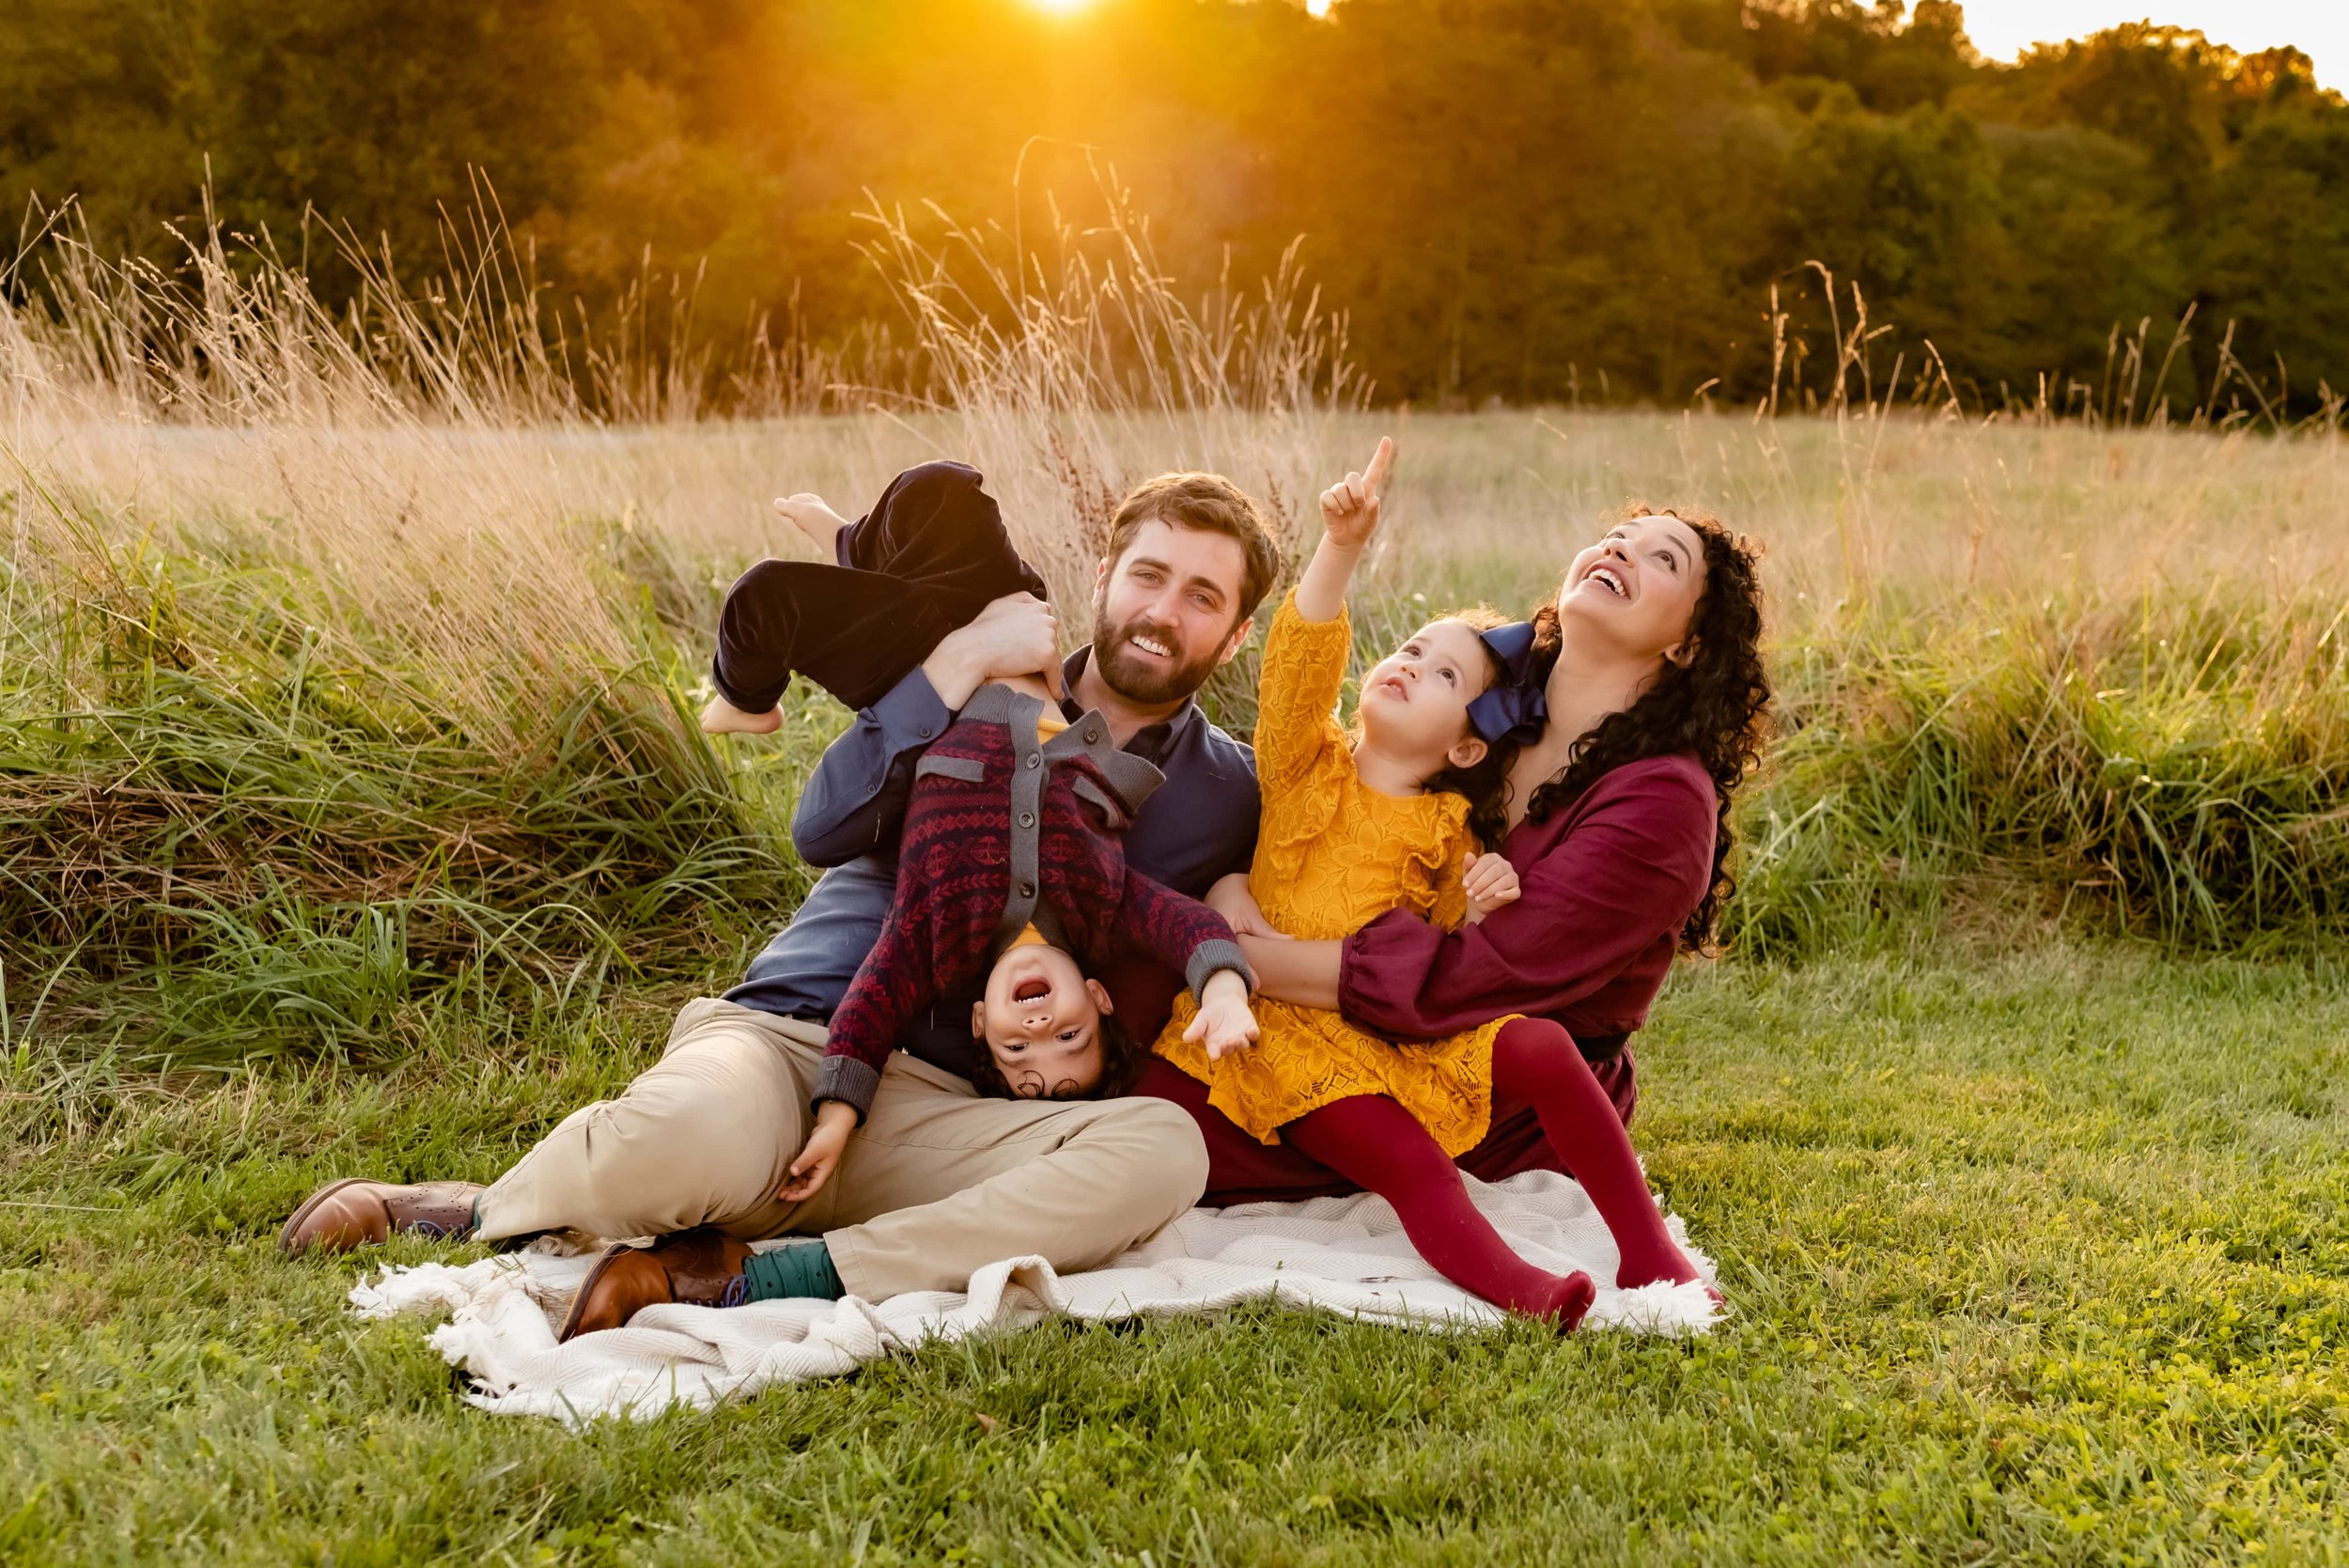 Maryland Family photos at sunset in a field